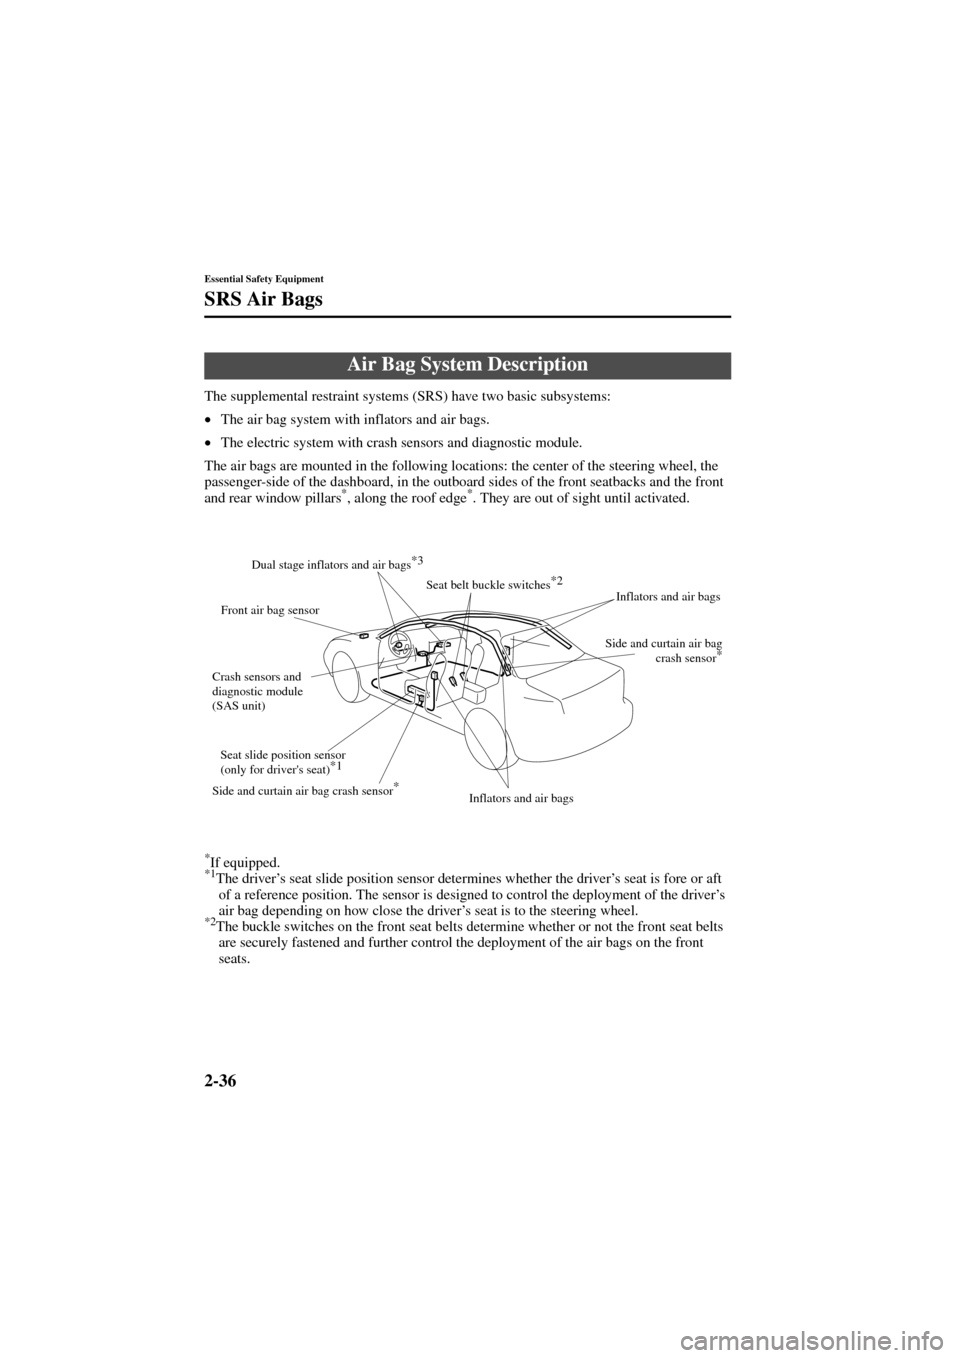 MAZDA MODEL 6 2004  Owners Manual (in English) 2-36
Essential Safety Equipment
SRS Air Bags
Form No. 8R29-EA-02I
The supplemental restraint systems (SRS) have two basic subsystems:
•
The air bag system with inflators and air bags.
•
The electr